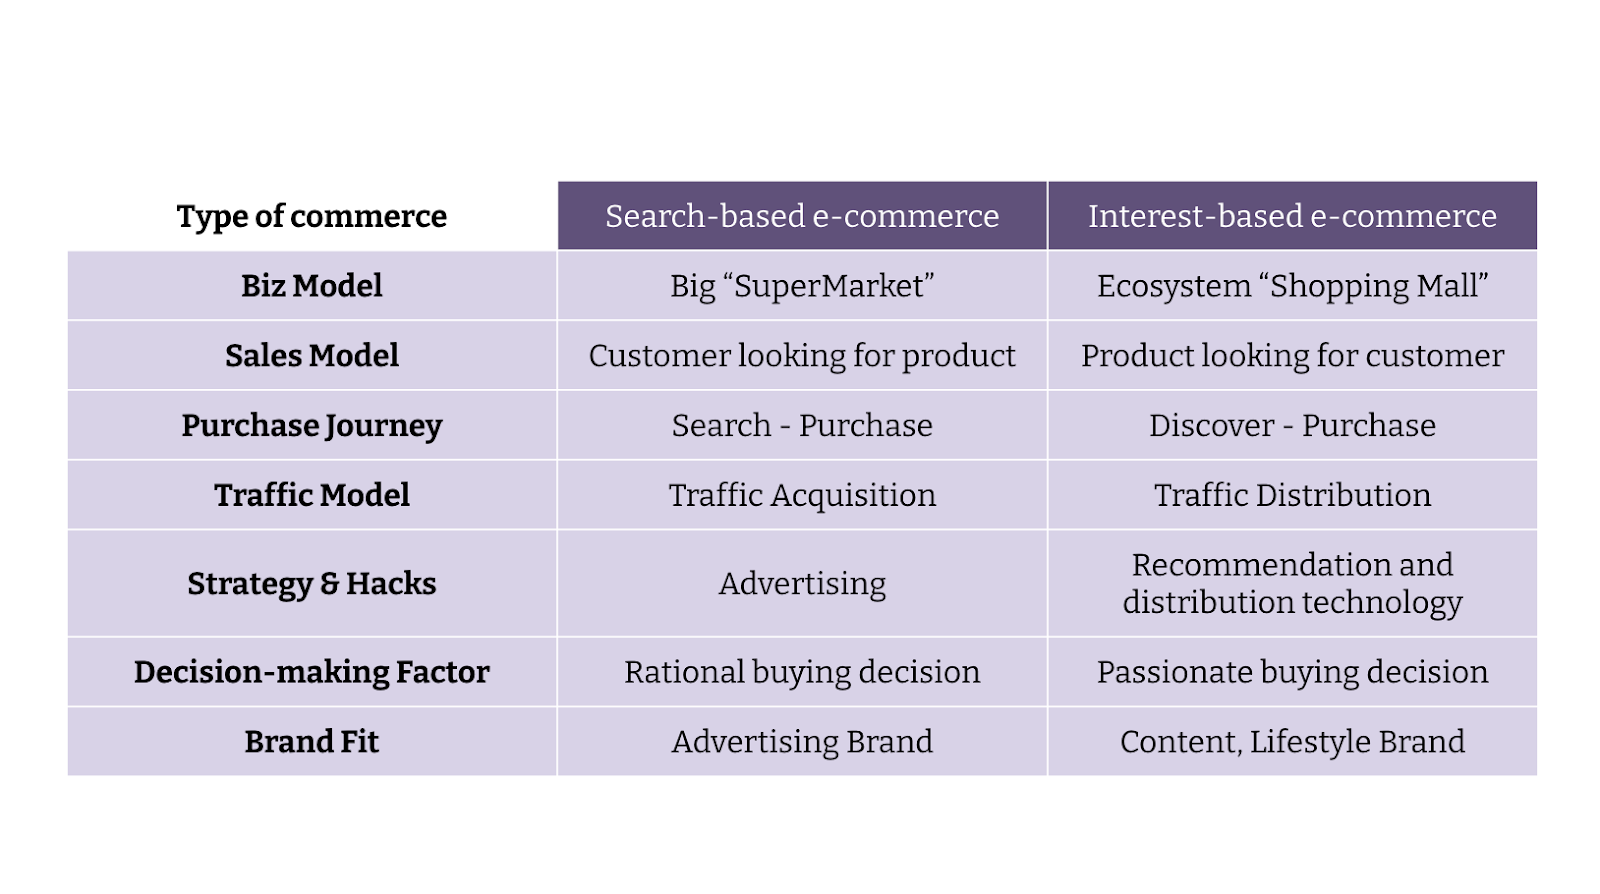 Comparison table between search-based and interest-based e-commerce